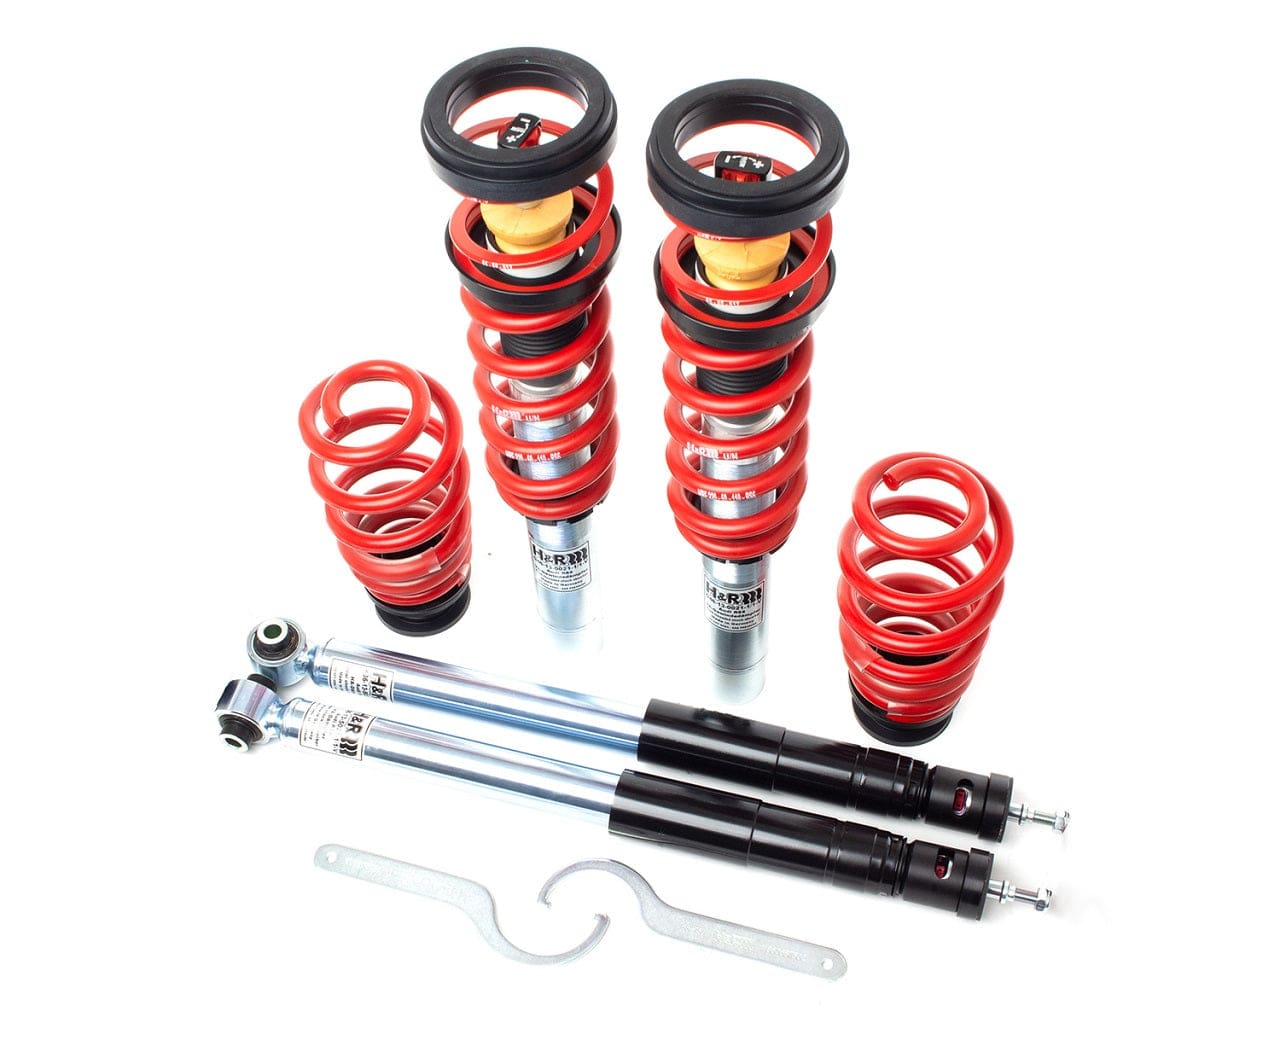 H&R Coilovers - RSS+ Coilovers, 2015-2017 Volkswagen Golf